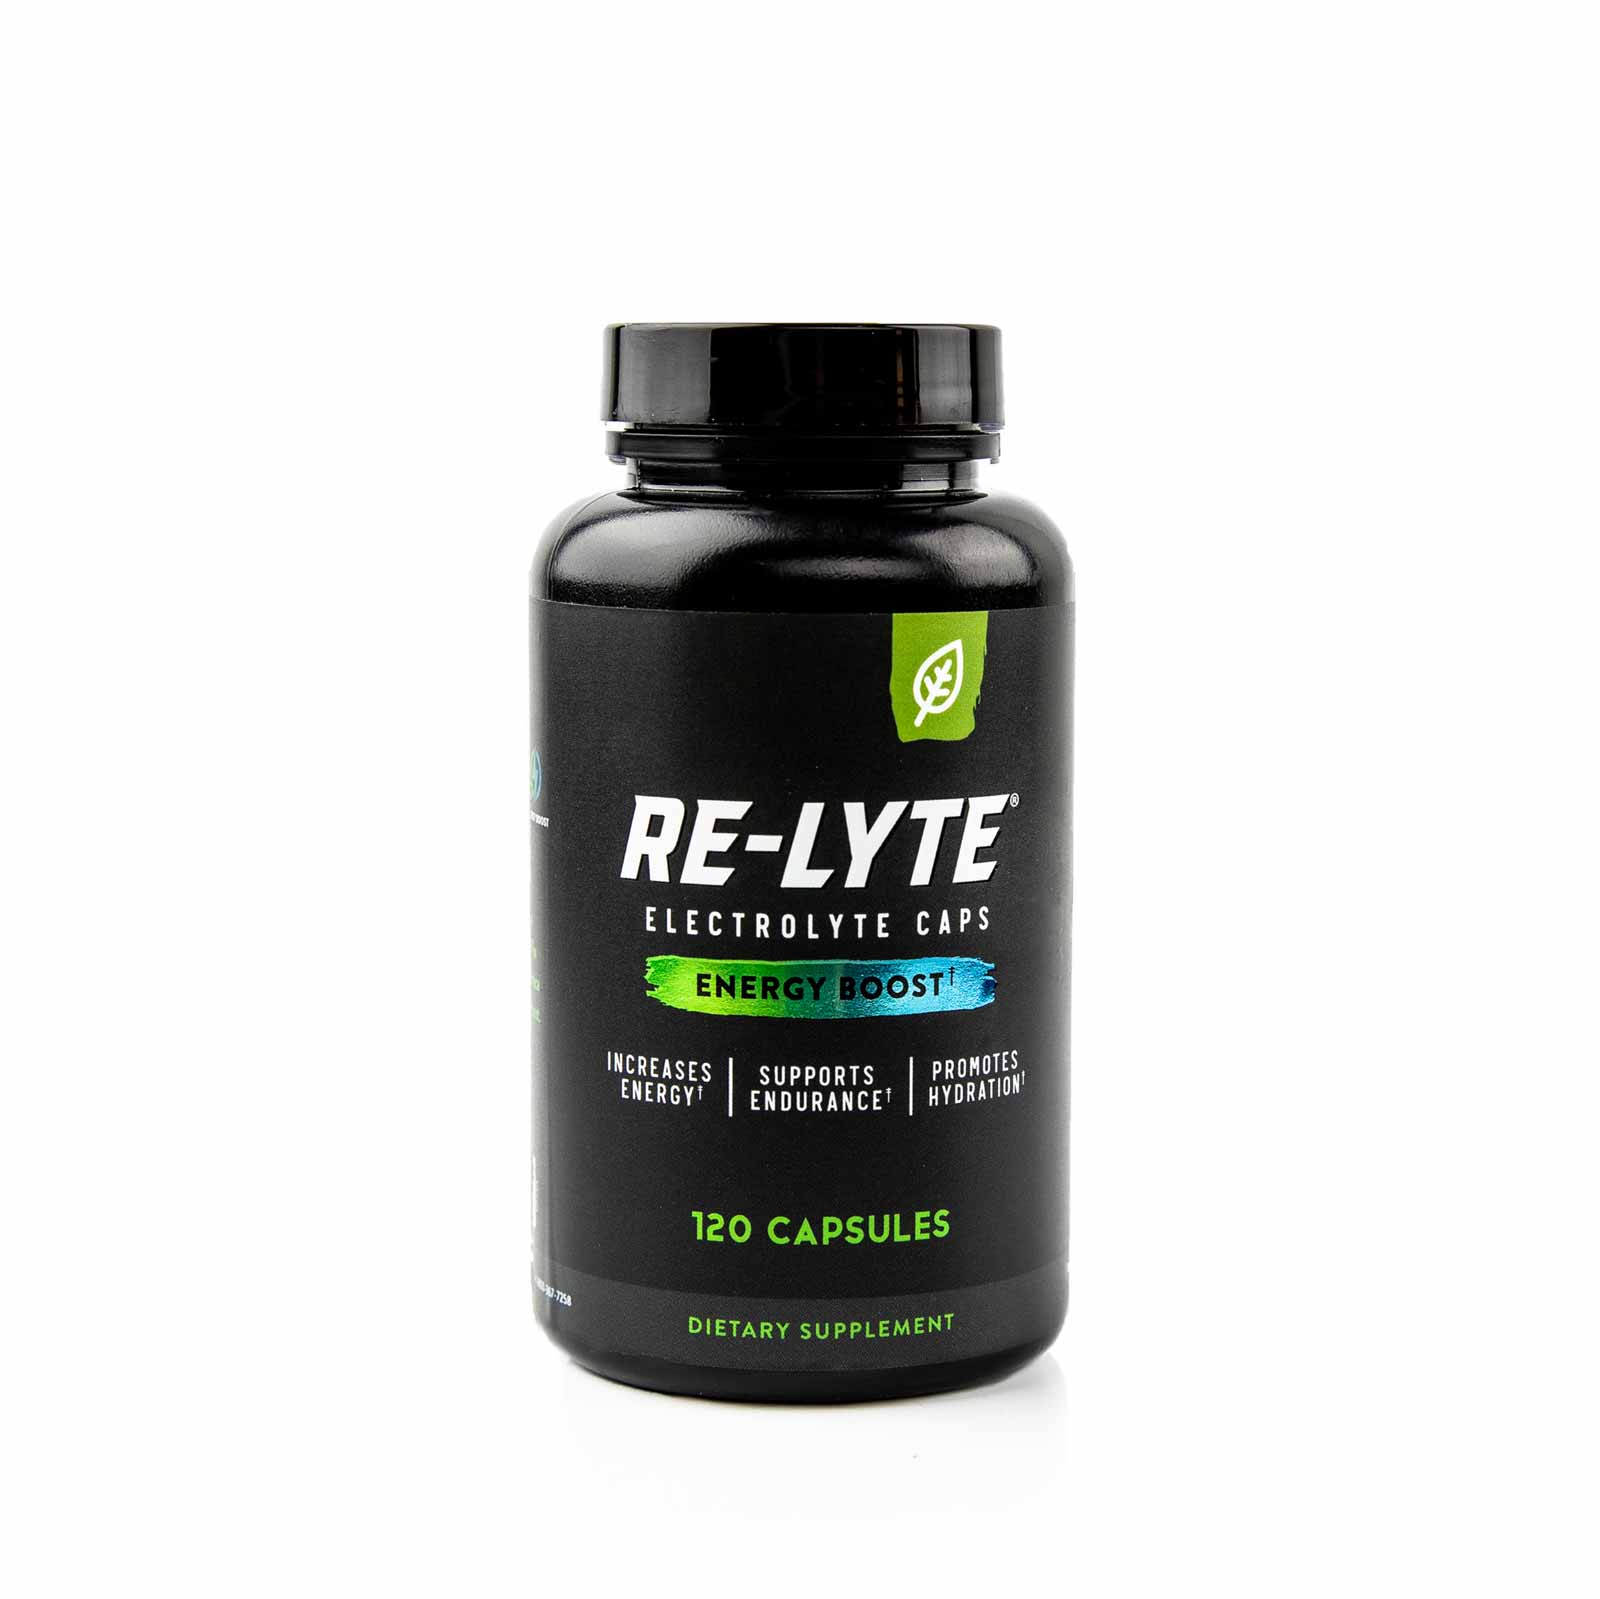 https://cdn.shopify.com/s/files/1/0031/8606/5475/products/Re-Lyte-Energy-Boost-Capsules-FRONT.jpg?v=1632156014